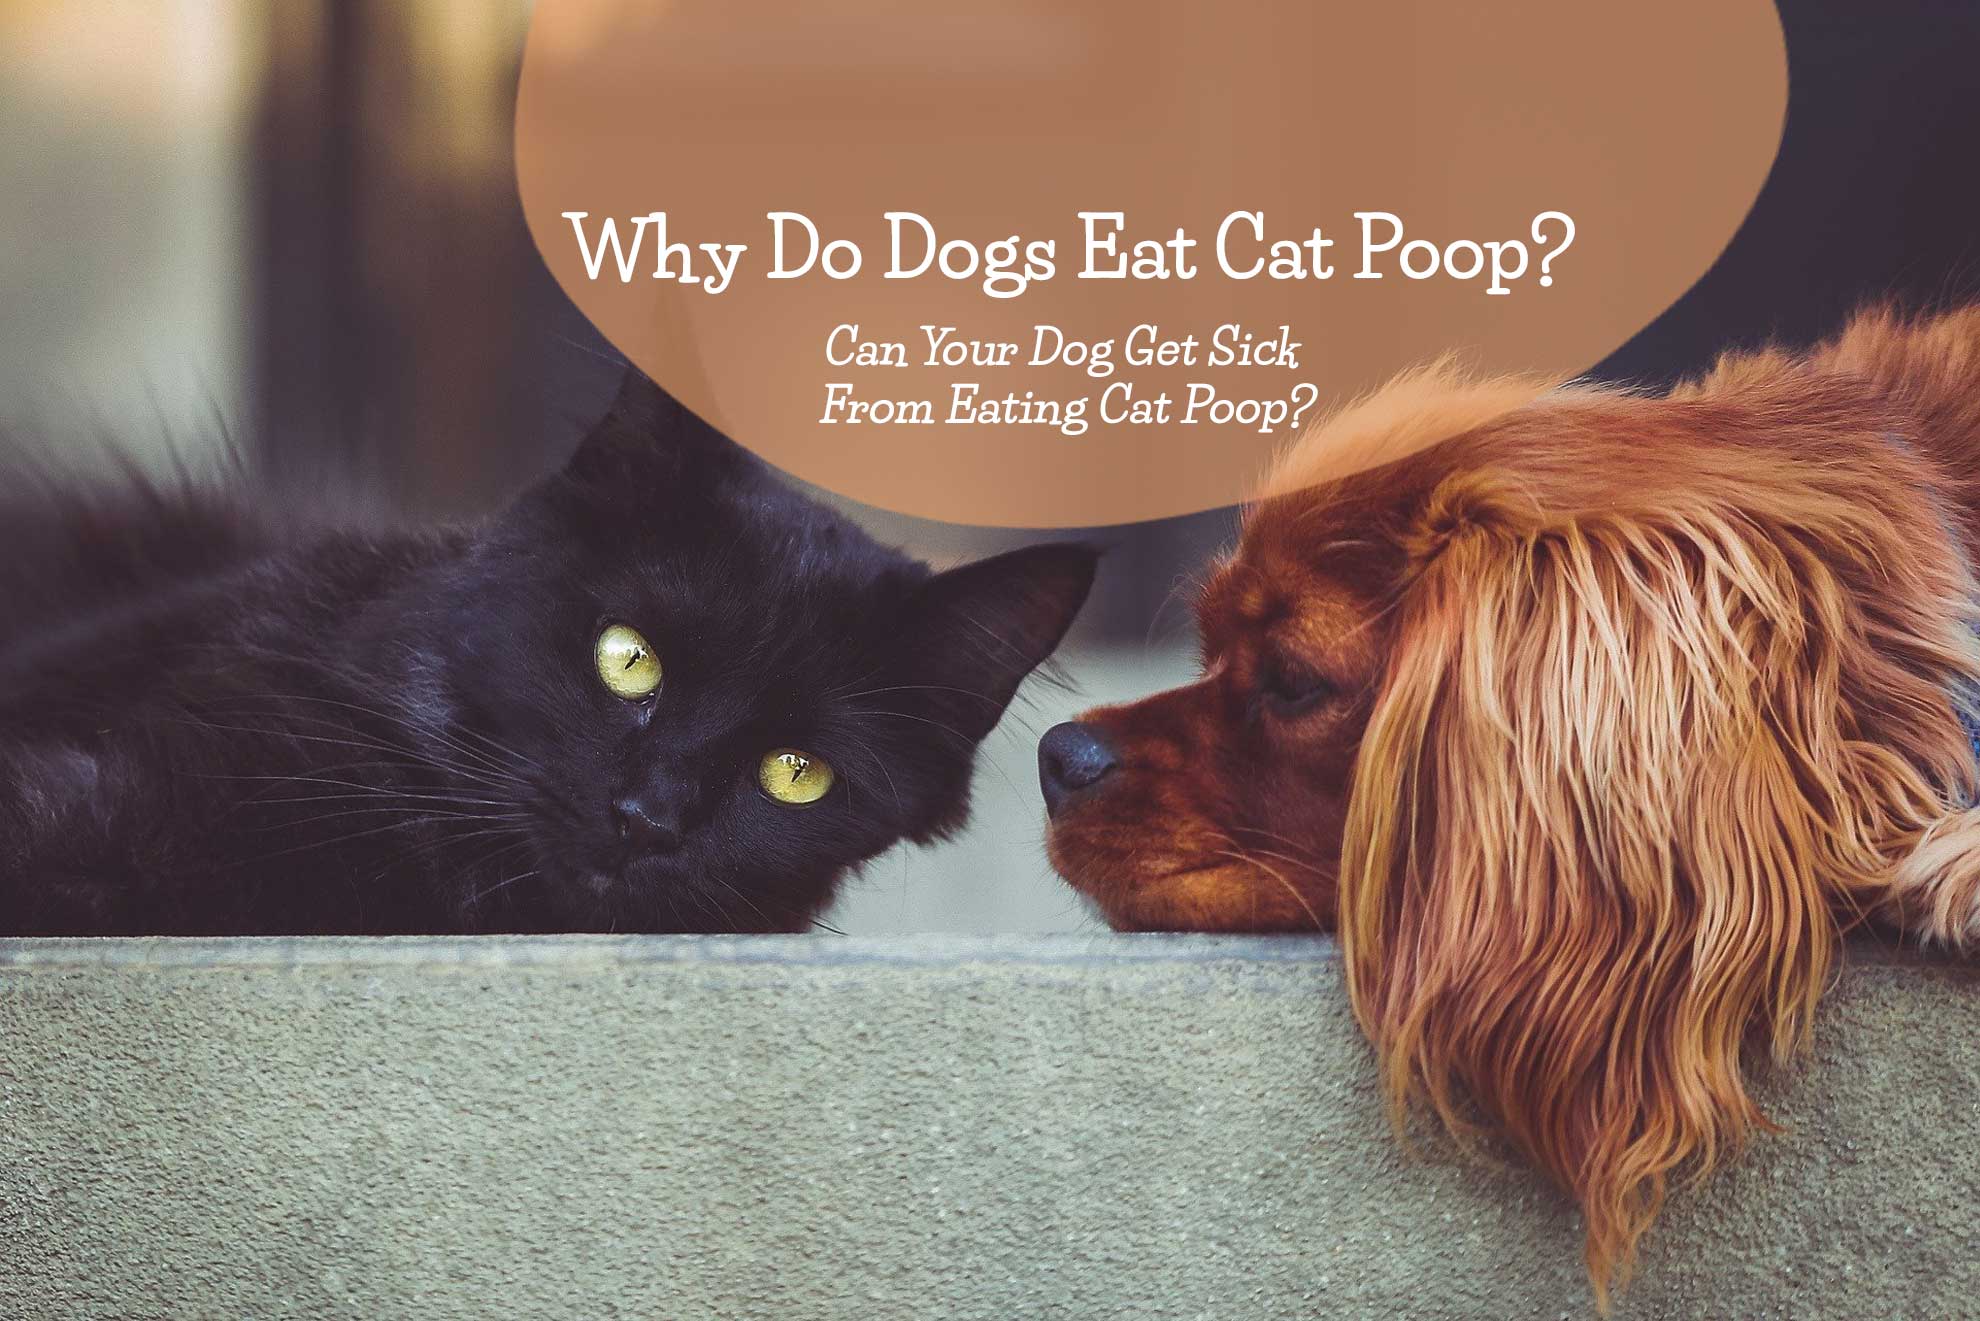 Why Do Dogs Eat Cat Poop Can Your Dog Get Sick From Eating Cat Poop